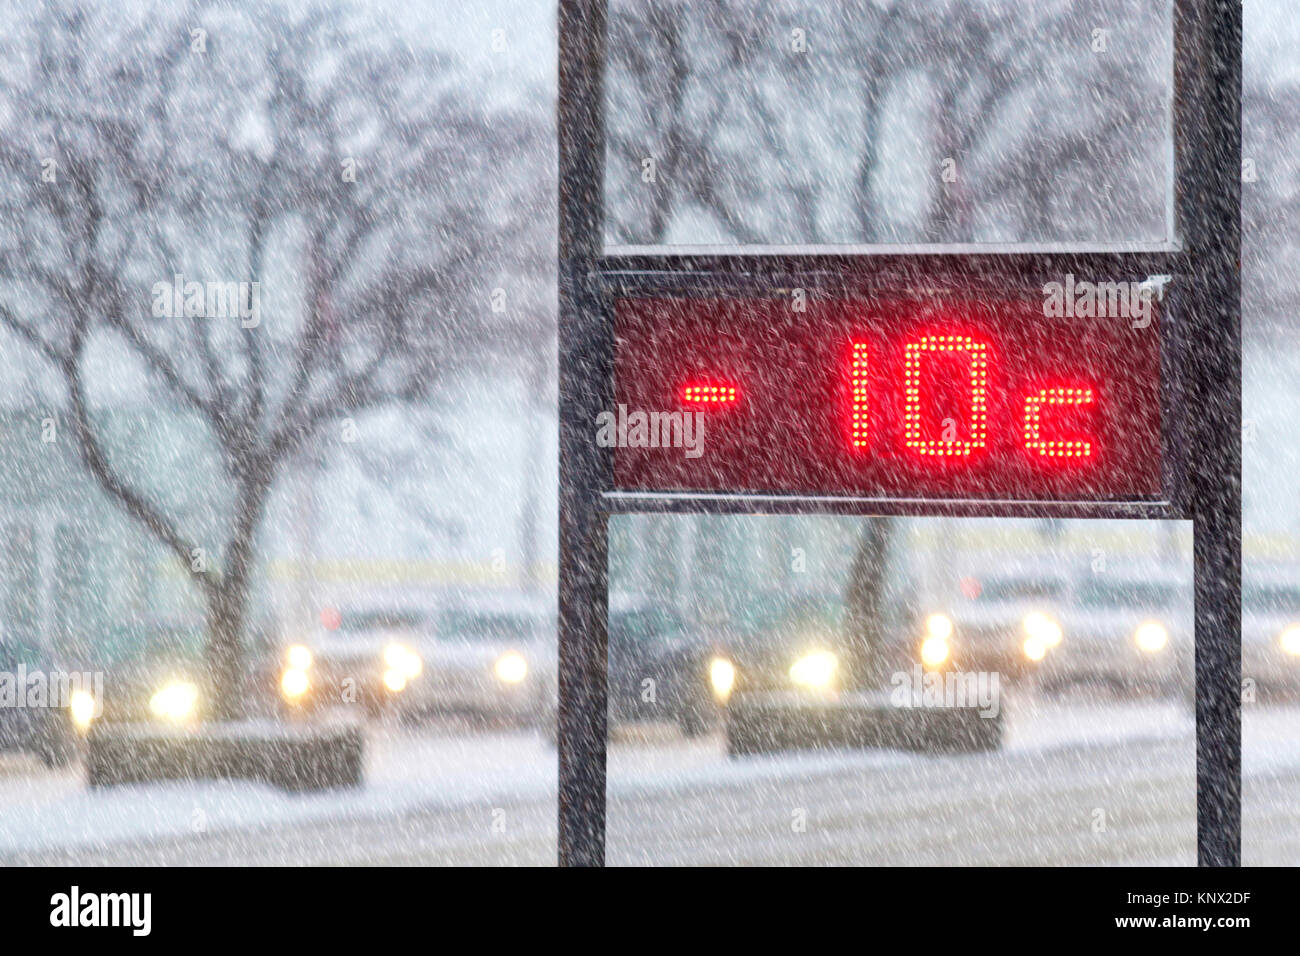 Montreal,Canada,12 December,2017.Road-side thermometer indicating a -10  celcius temperture outside.Credit;Mario Beauregard/Alamy Live News Stock  Photo - Alamy